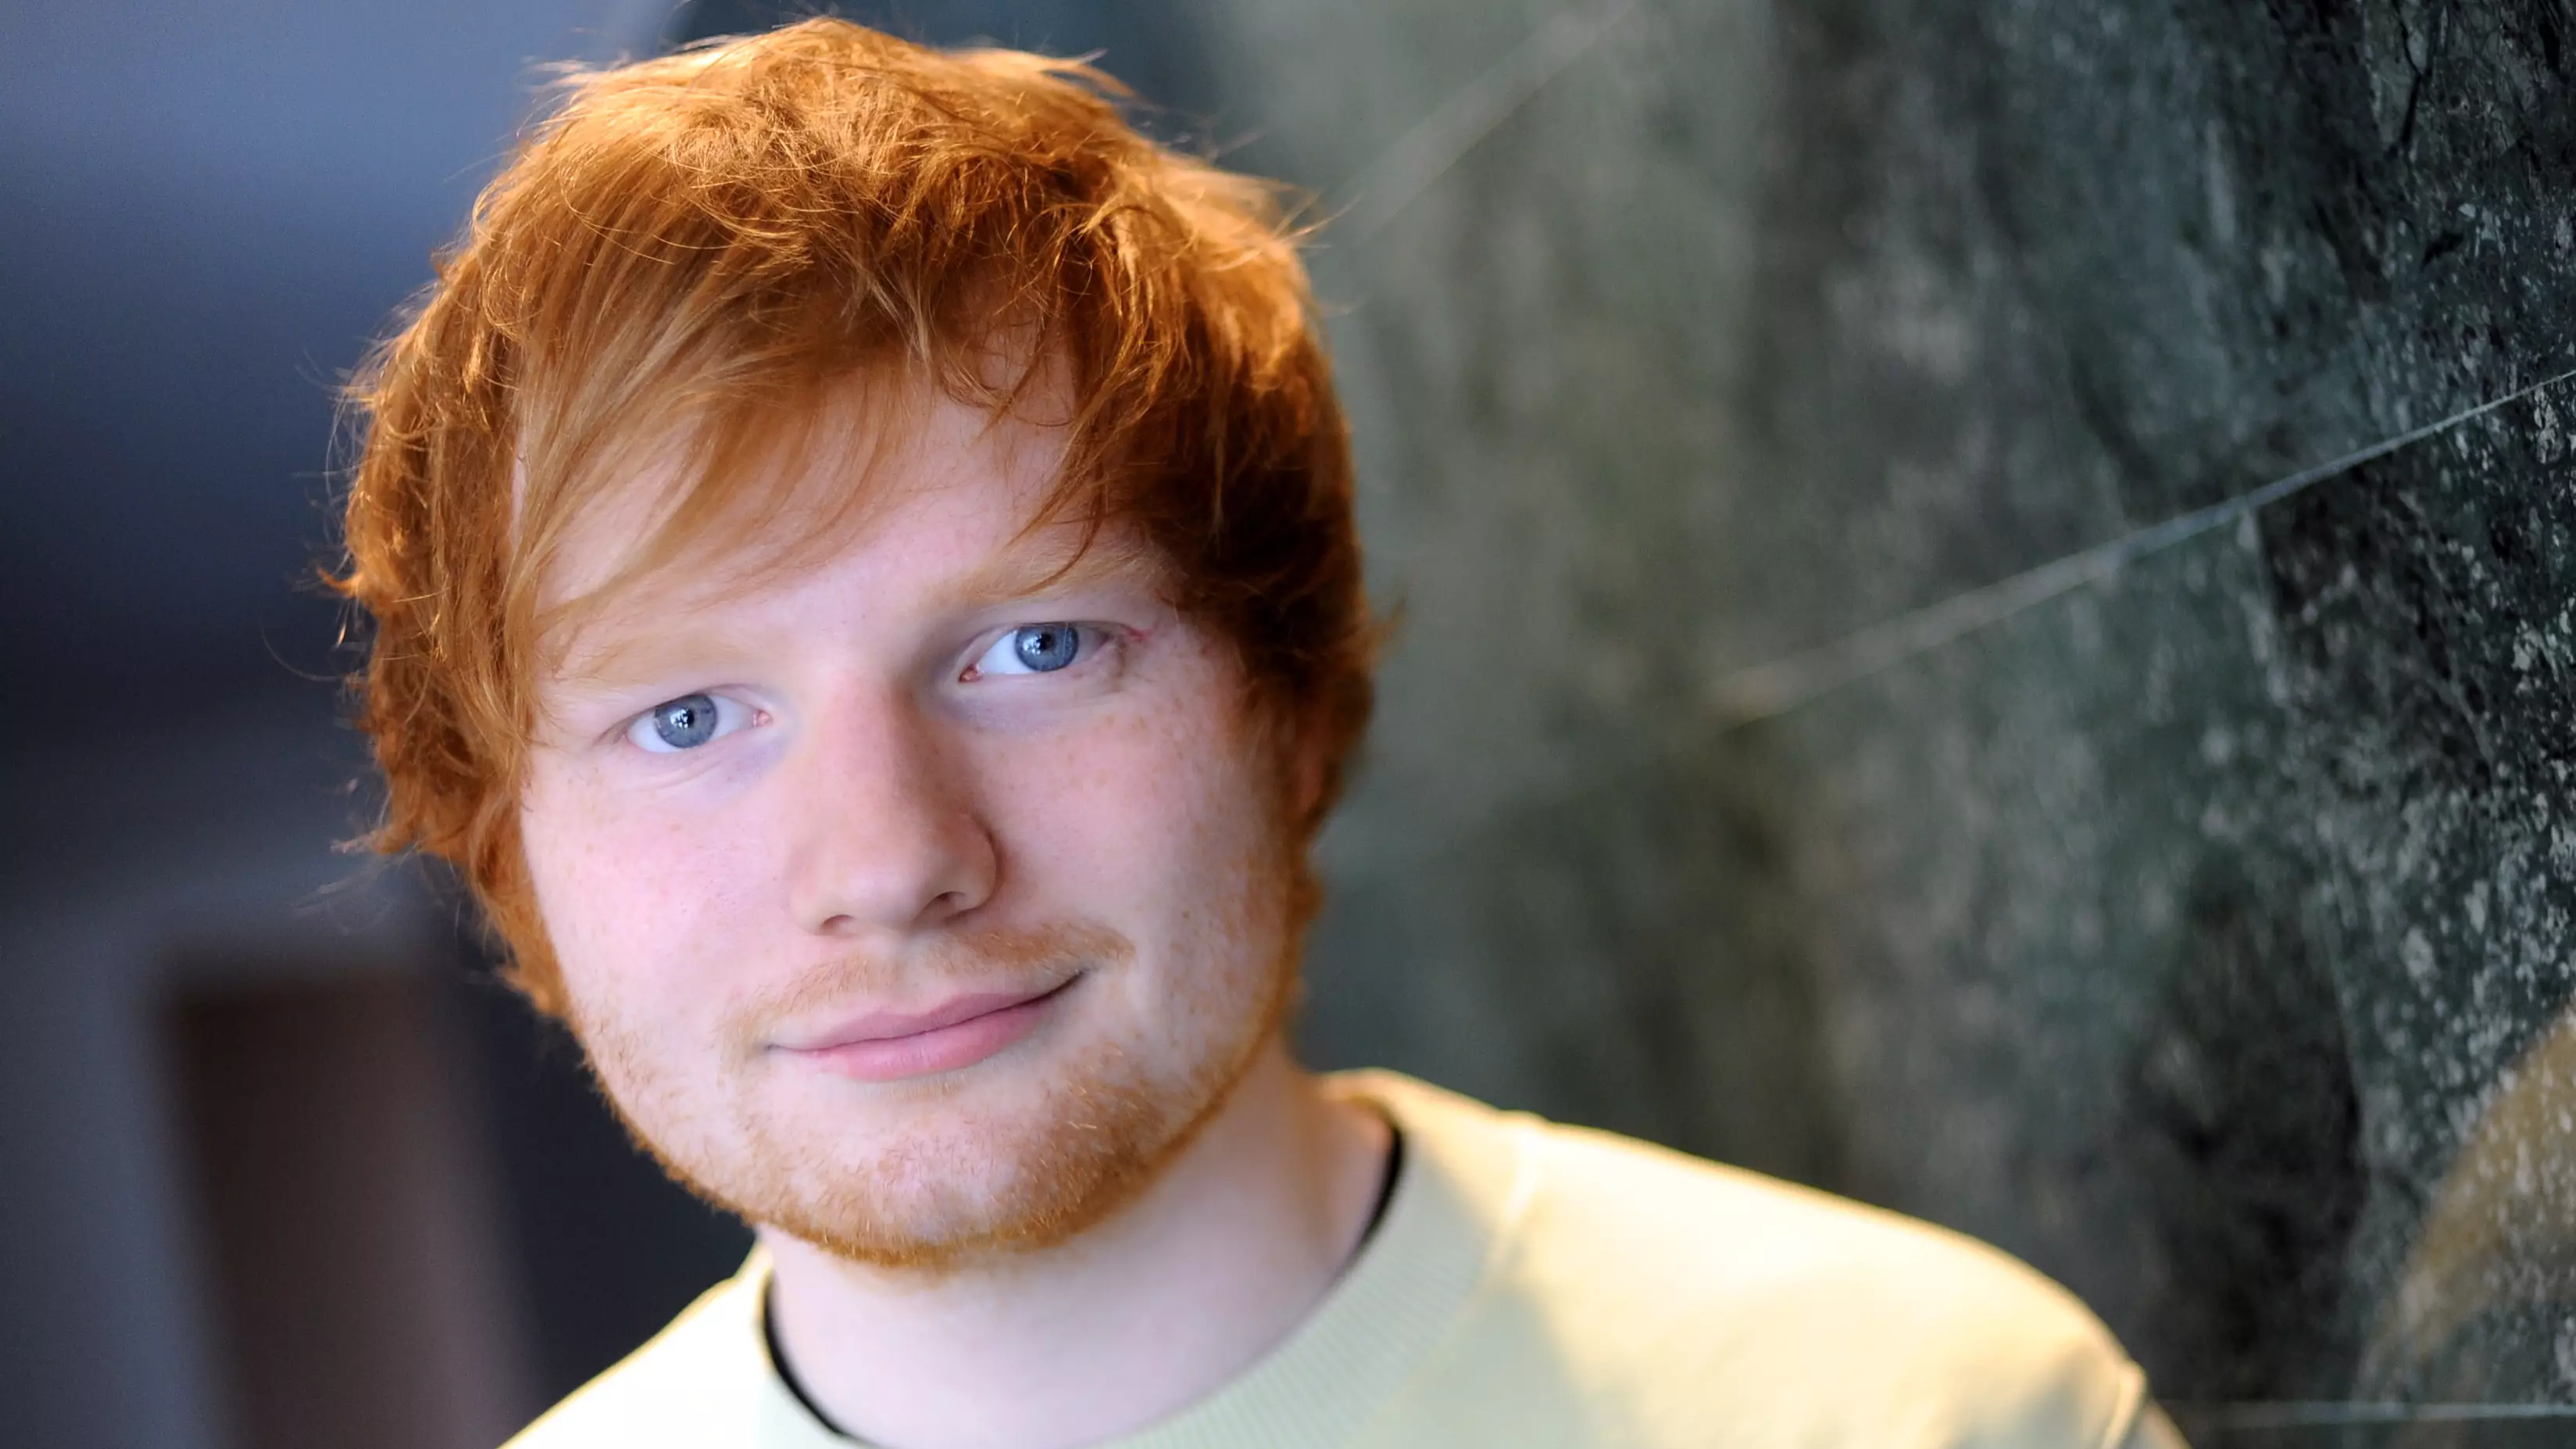 Ed Sheeran Has Injured His Arm After 'Being Hit By A Car'